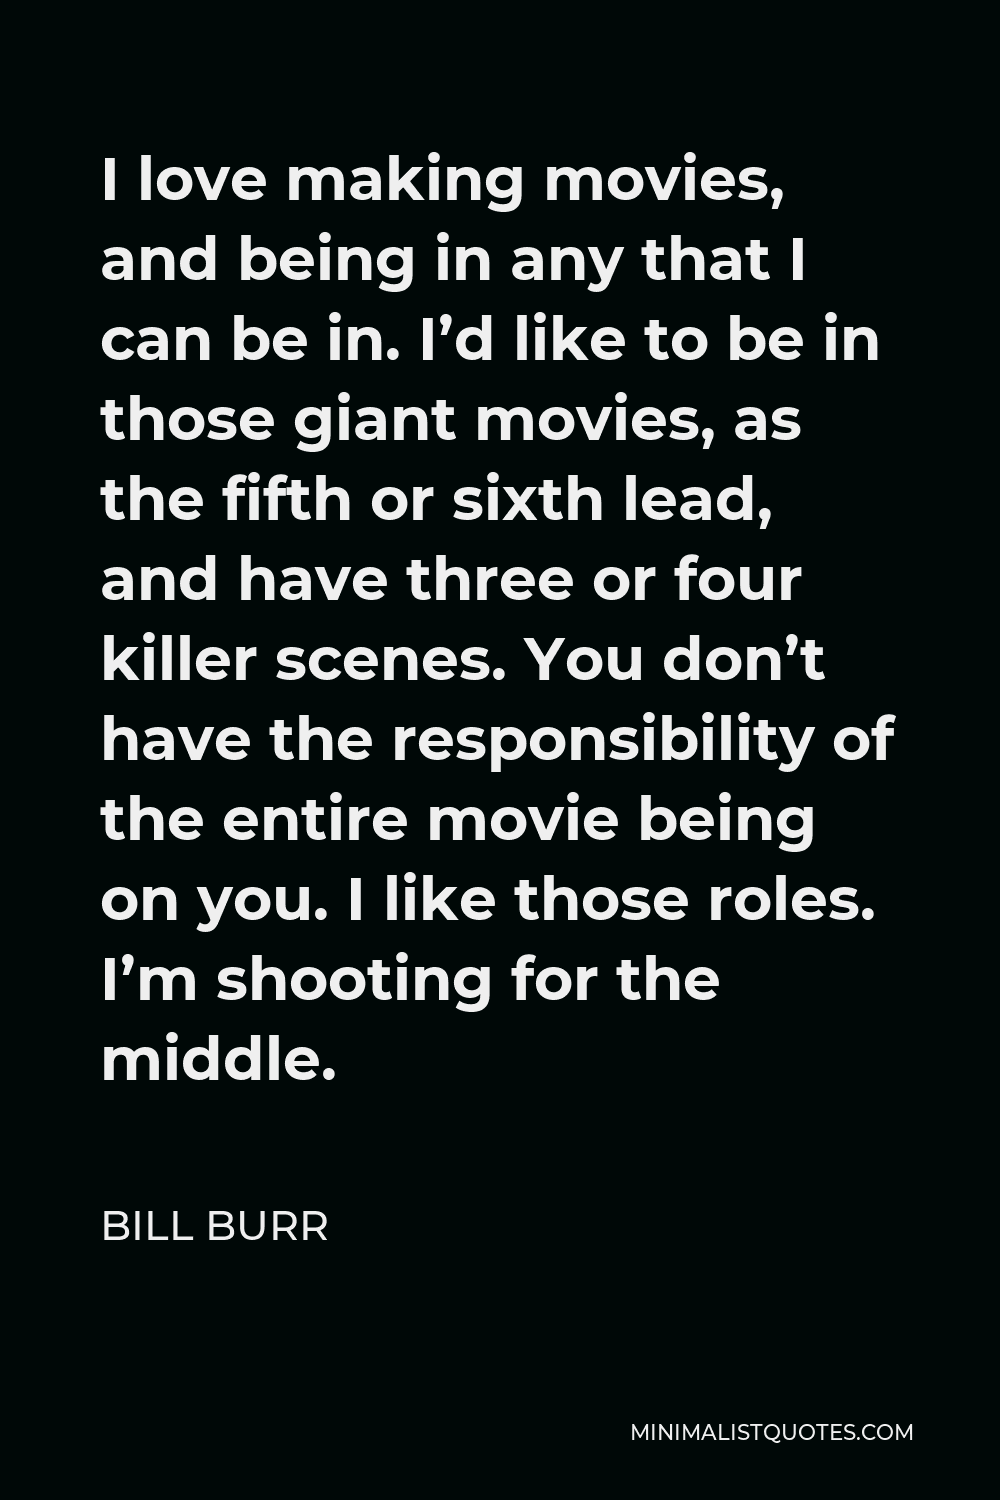 Bill Burr Quote - I love making movies, and being in any that I can be in. I’d like to be in those giant movies, as the fifth or sixth lead, and have three or four killer scenes. You don’t have the responsibility of the entire movie being on you. I like those roles. I’m shooting for the middle.